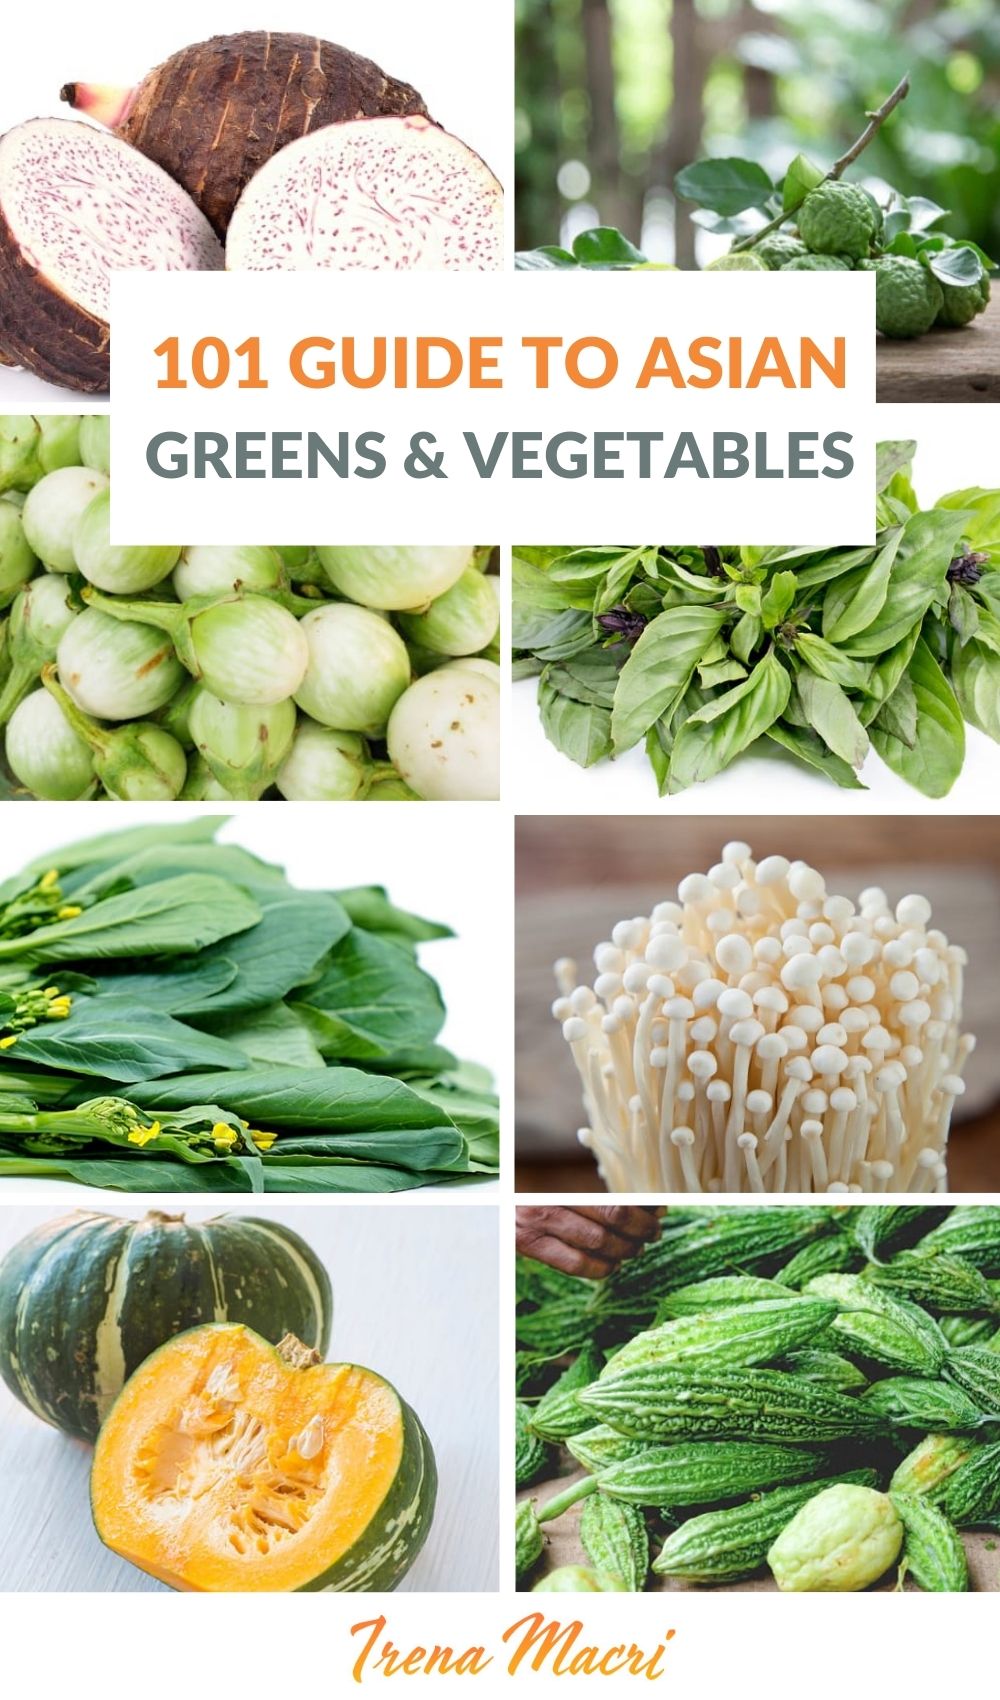 101 Guide To Asian Greens, Vegetables, Mushrooms & Herbs